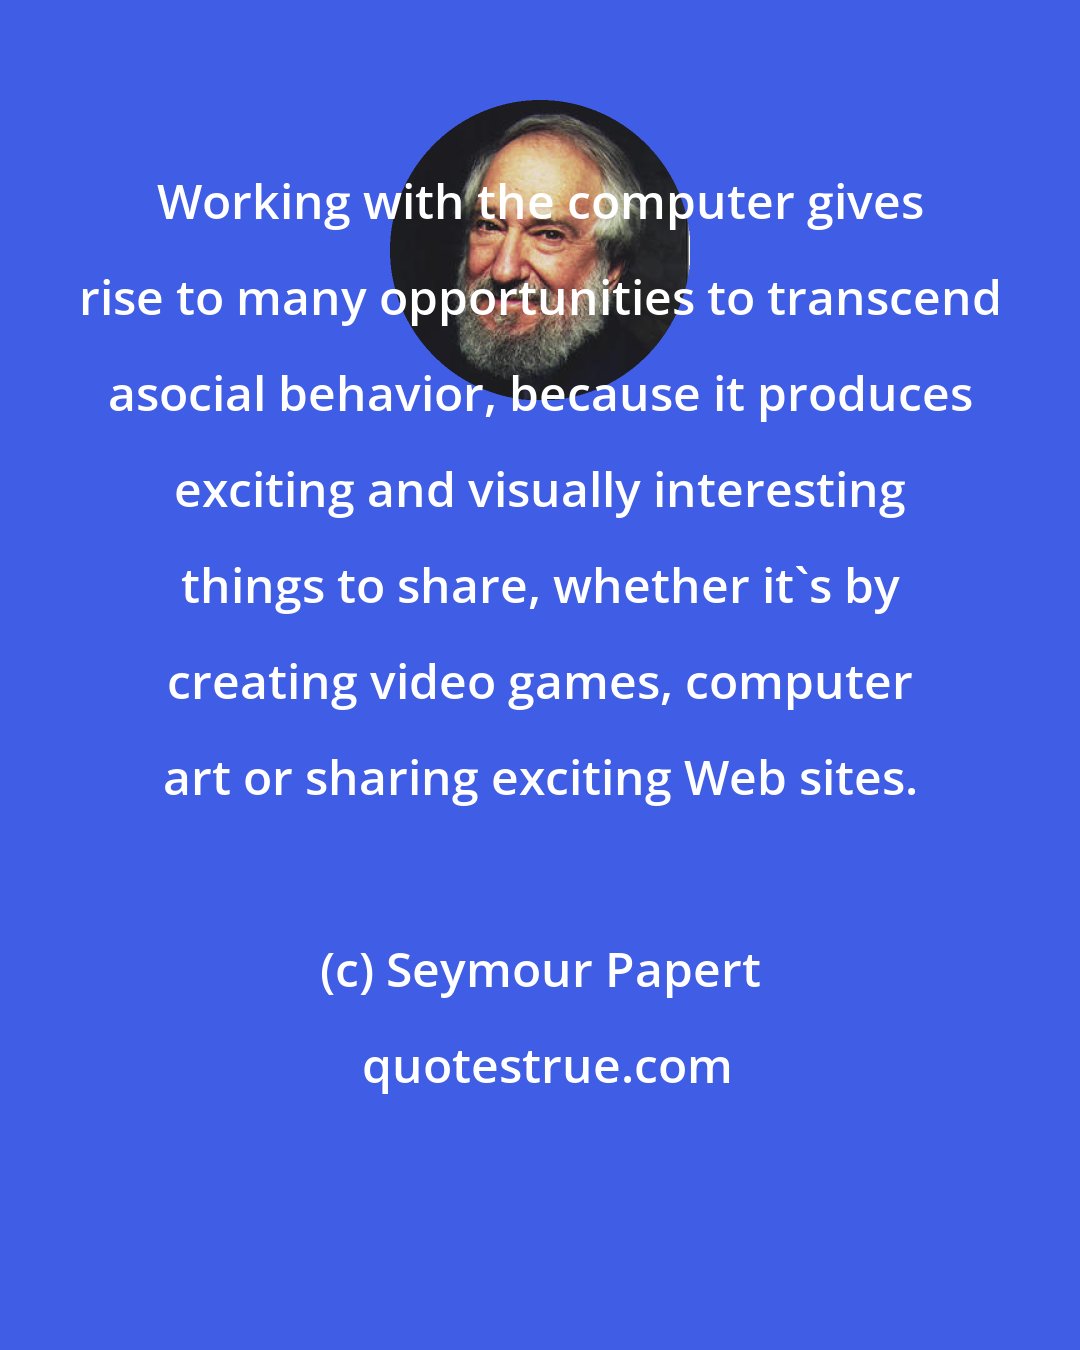 Seymour Papert: Working with the computer gives rise to many opportunities to transcend asocial behavior, because it produces exciting and visually interesting things to share, whether it's by creating video games, computer art or sharing exciting Web sites.